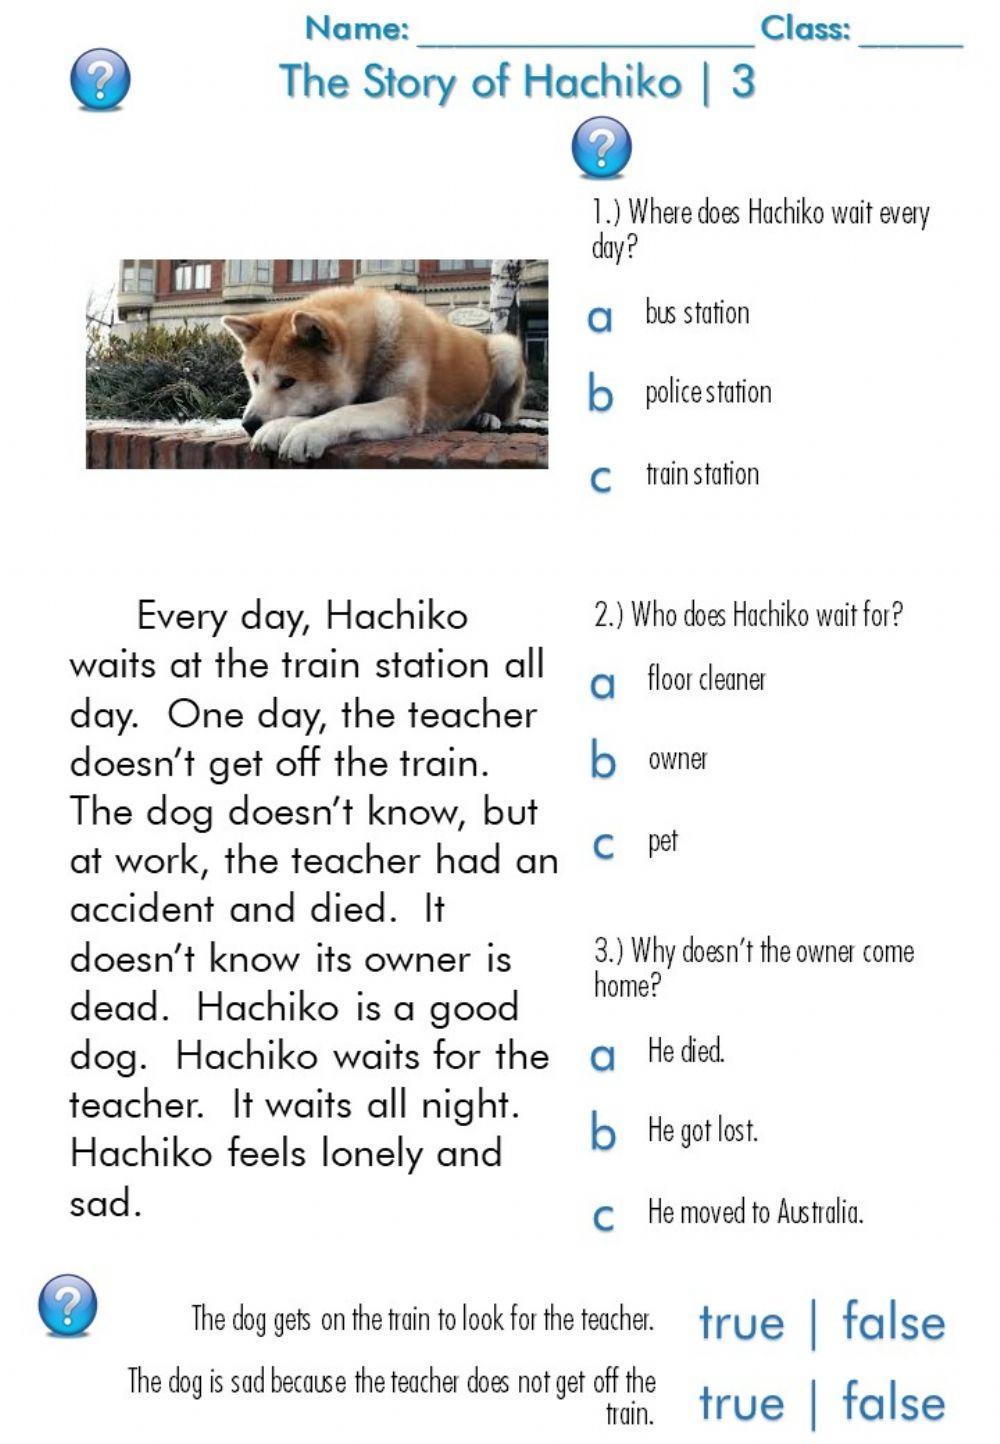 The Story of Hachiko 3